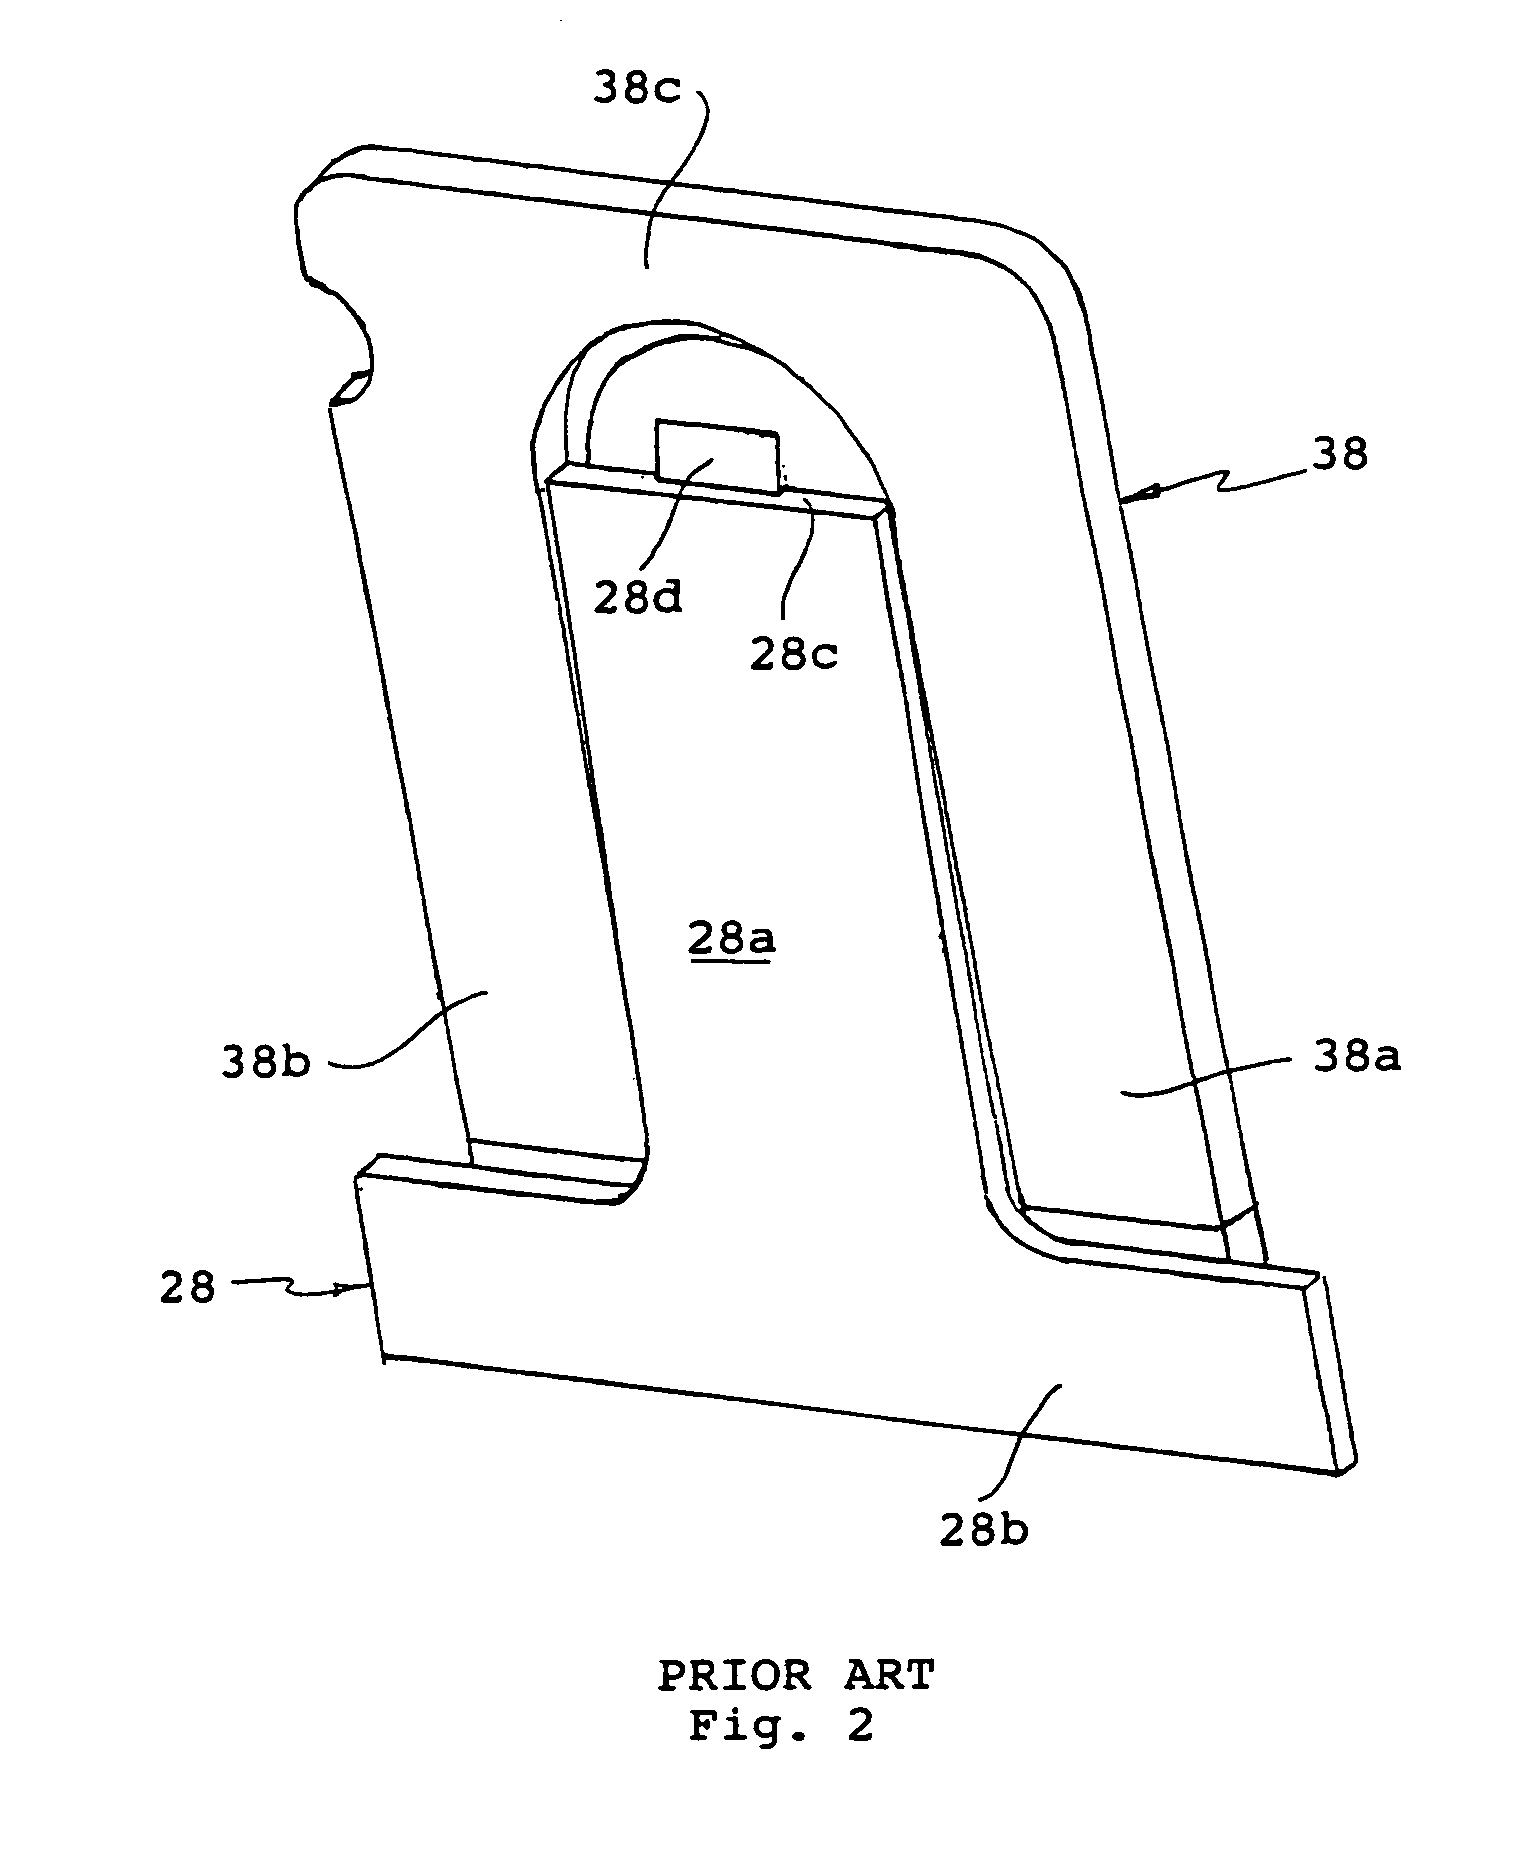 Method for ambient temperature compensating thermostat metal actuated electrical devices having a plurality of current ratings